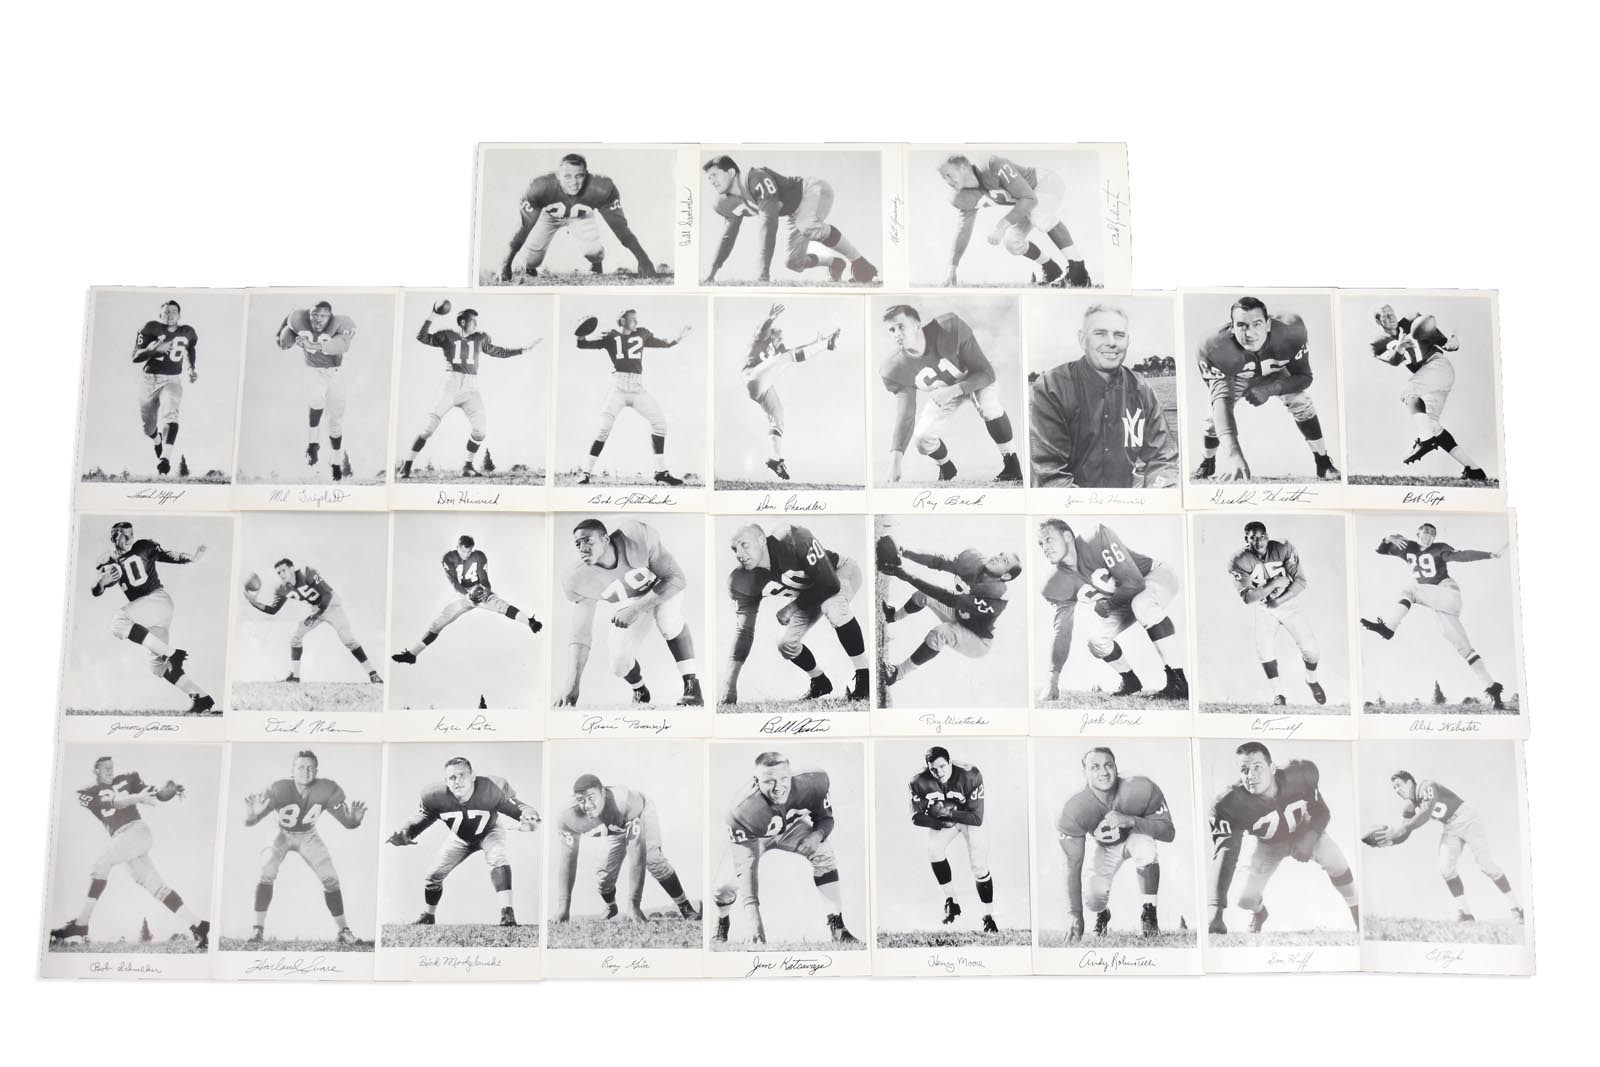 - Rare 1956 New York Giants Football Picture Pack (Ken MacAfee Collection)